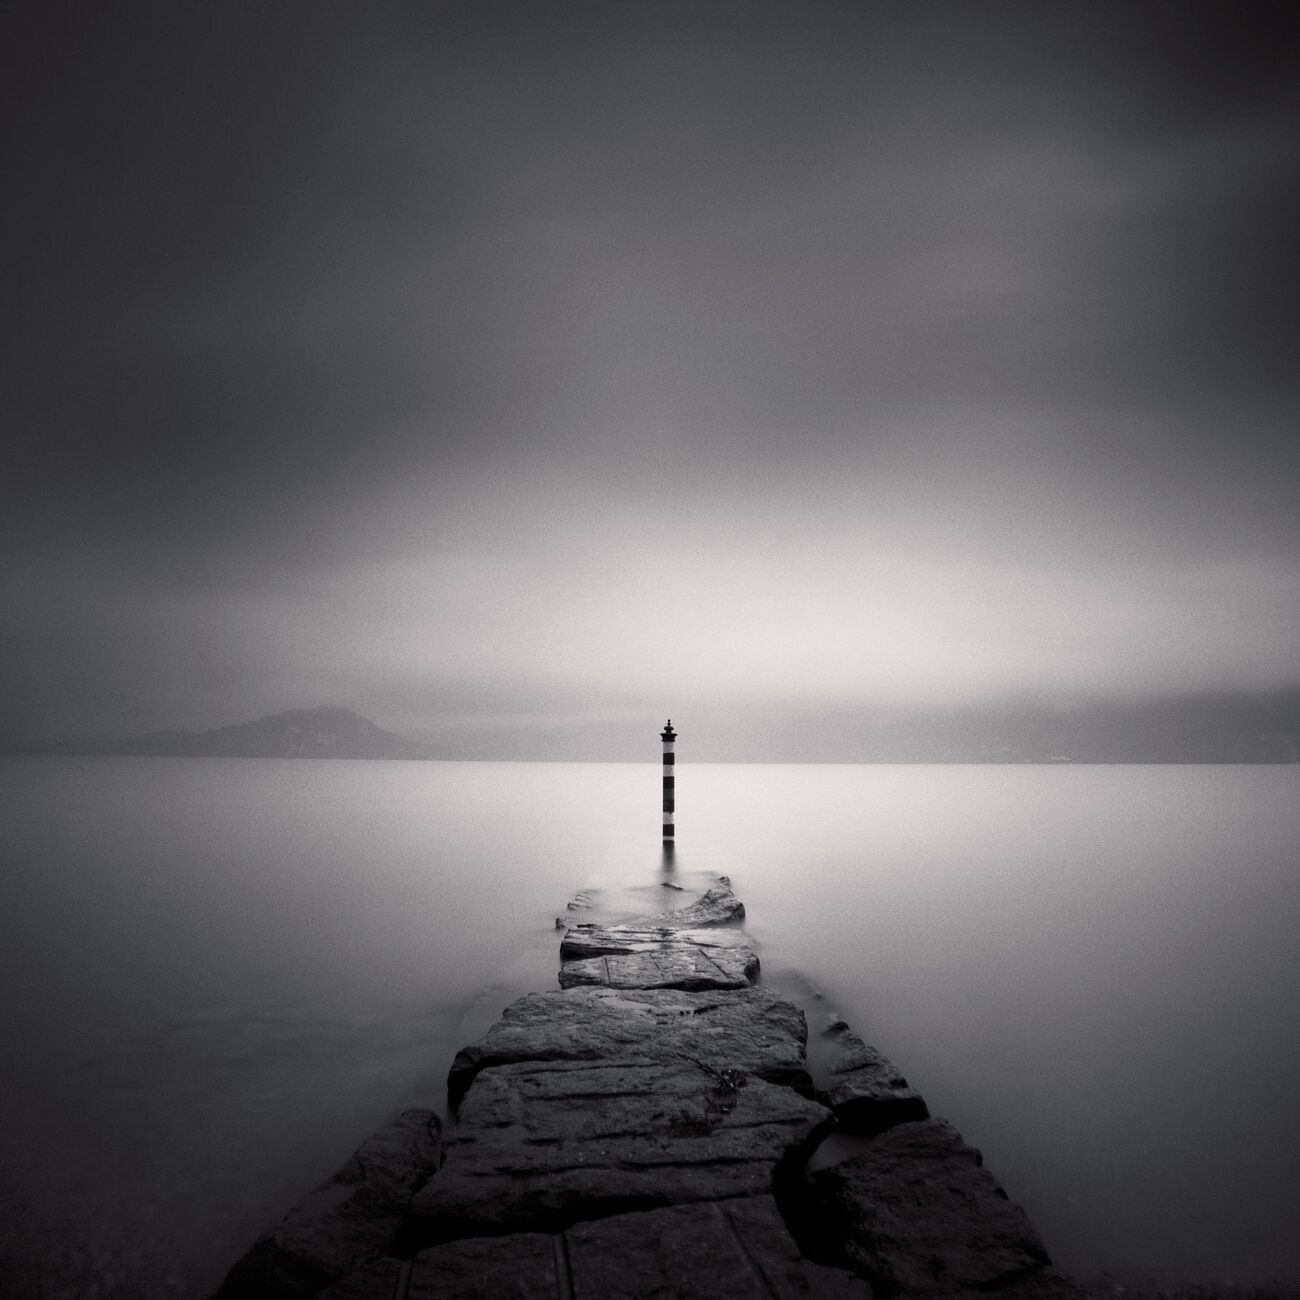 Striped Pole, Study 1, Lake Maggiore, Suisse. Août 2014. Ref-11441 - Denis Olivier Photographie